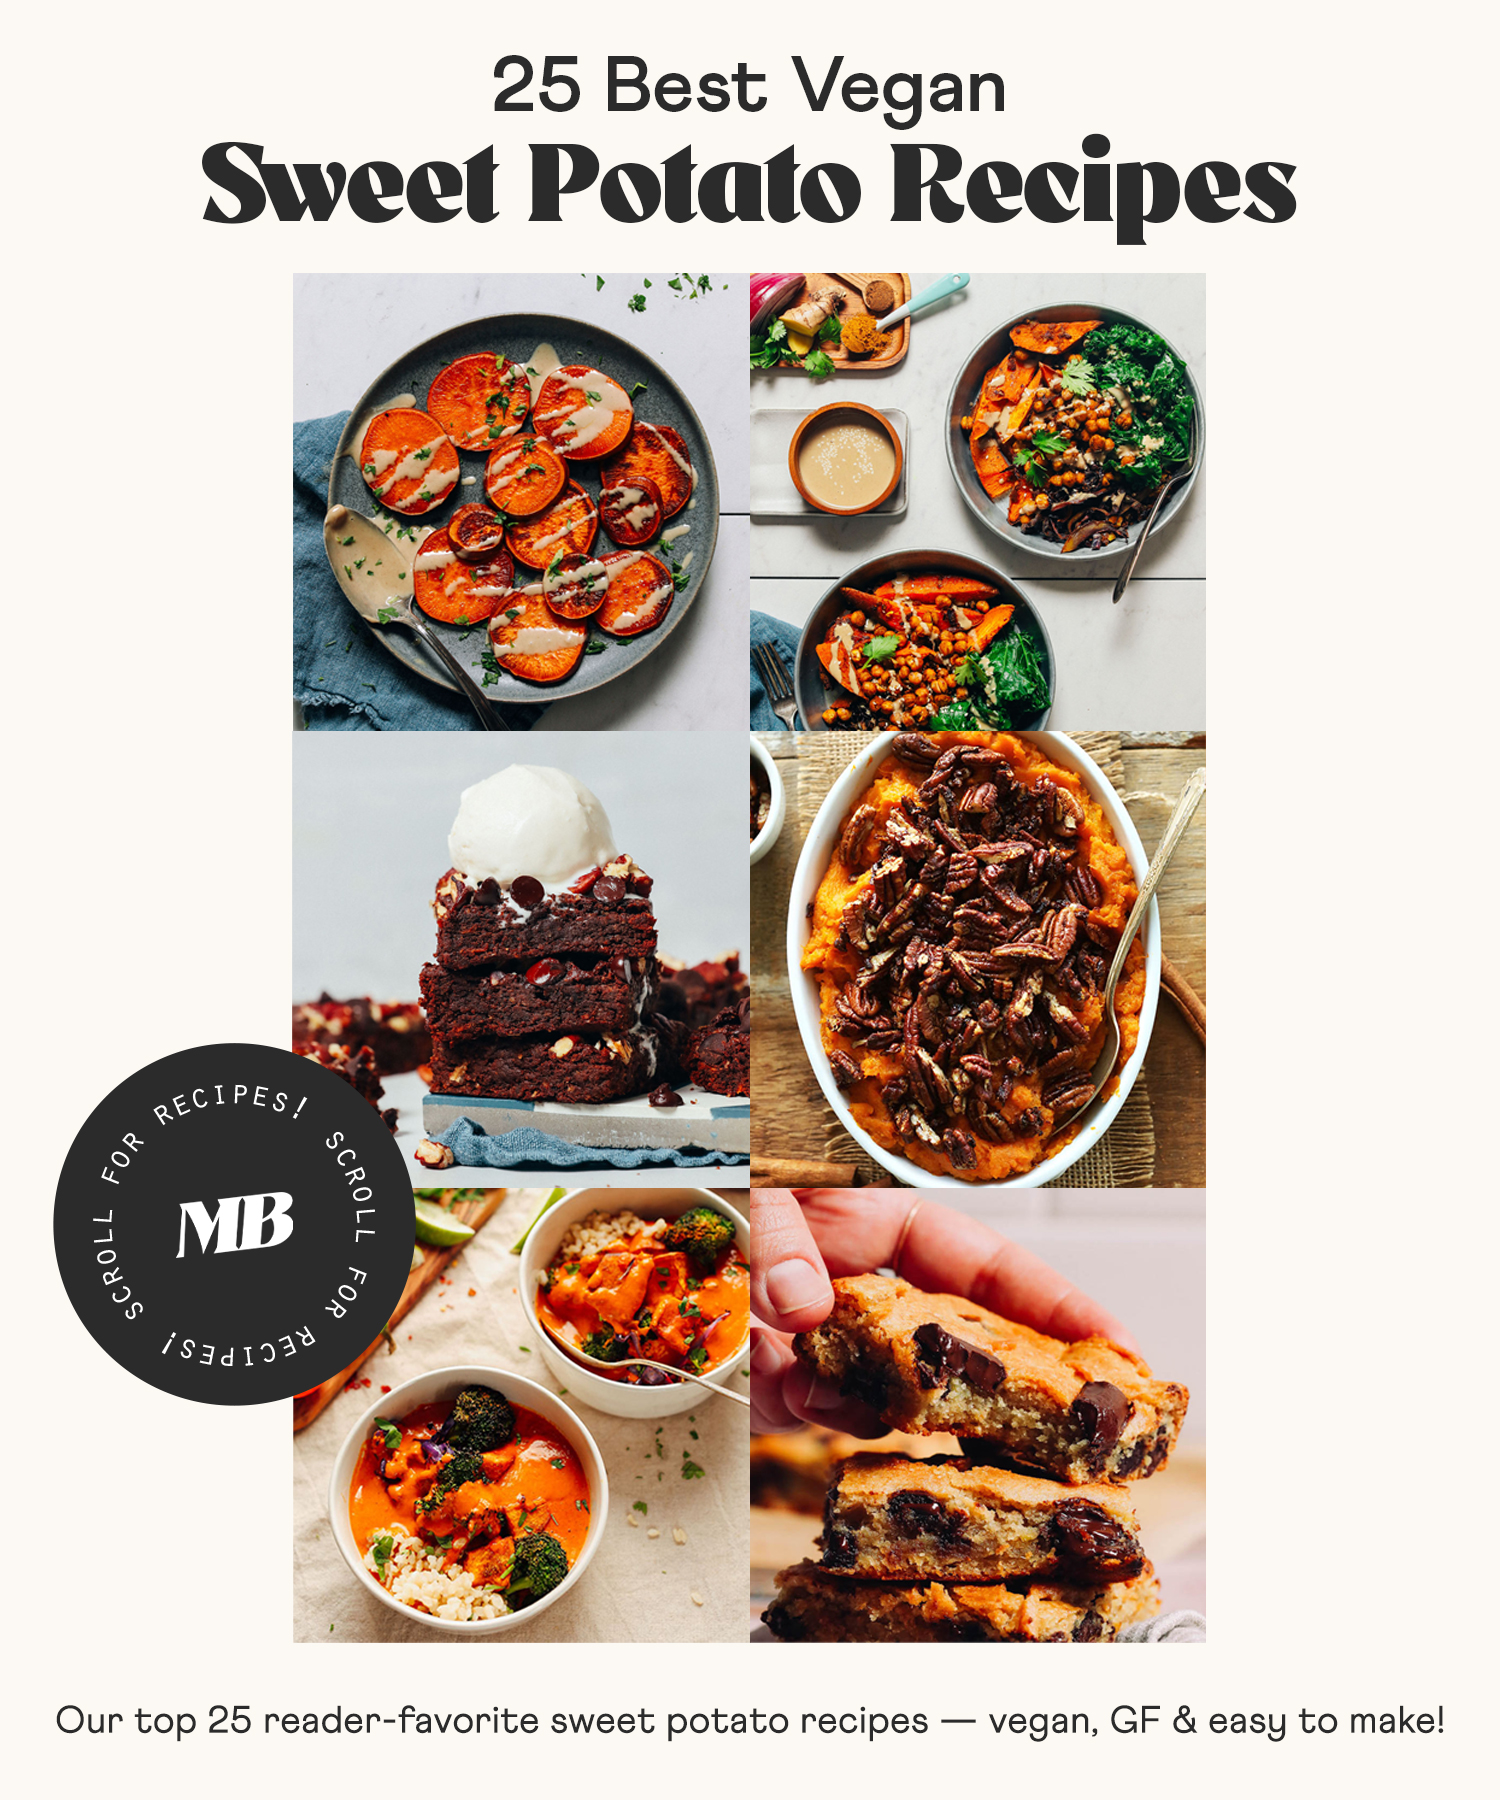 Photos of our best vegan sweet potato recipes including sweet potato brownies, blondies, mash, a sheet pan meal, curry, and a simple side